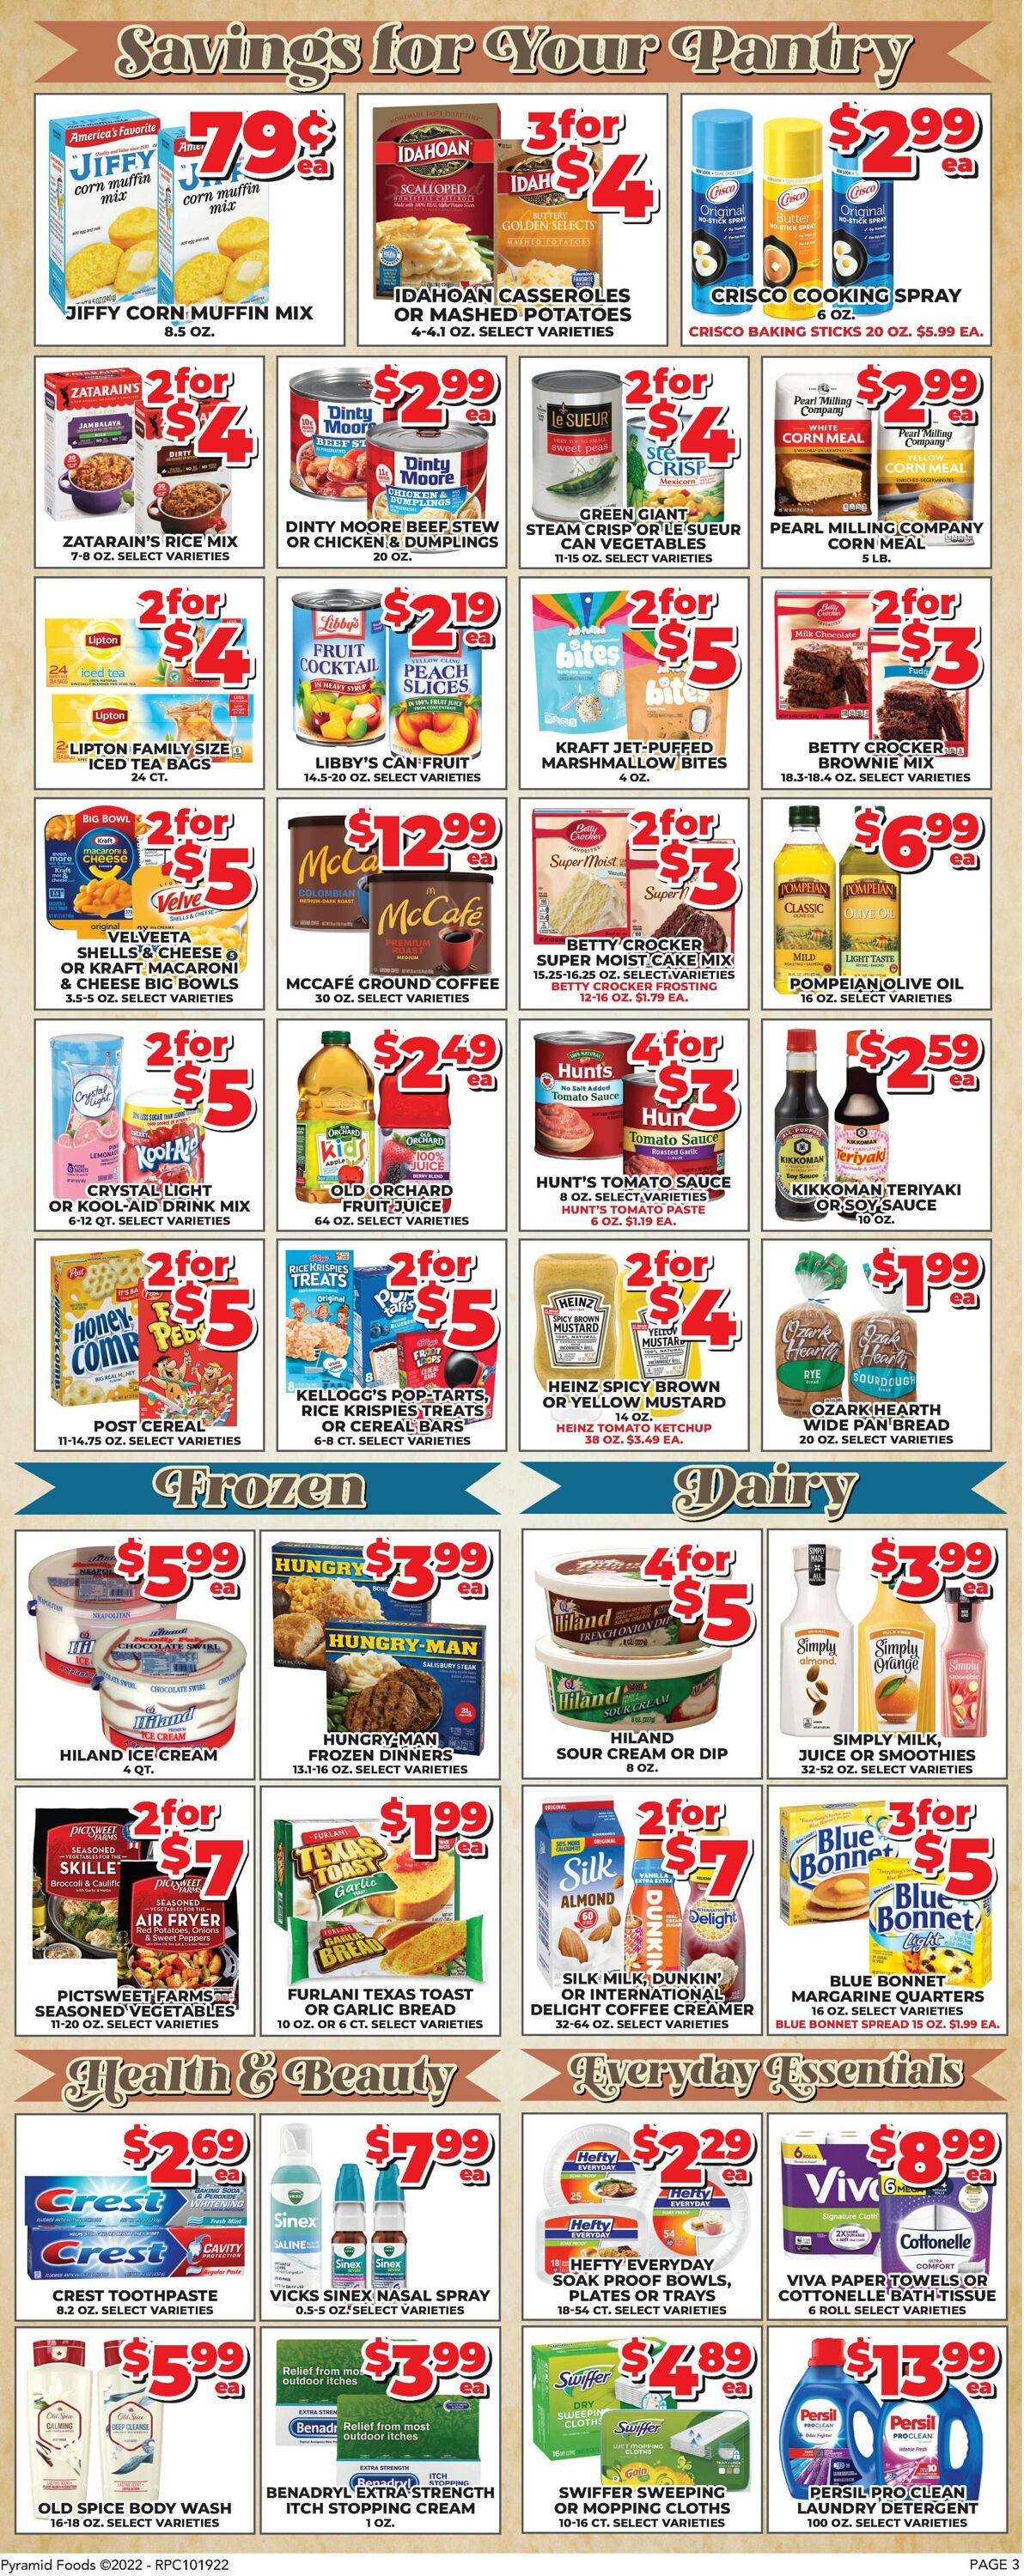 Price Cutter Weekly Ad Circular - valid 10/19-10/25/2022 (Page 3)